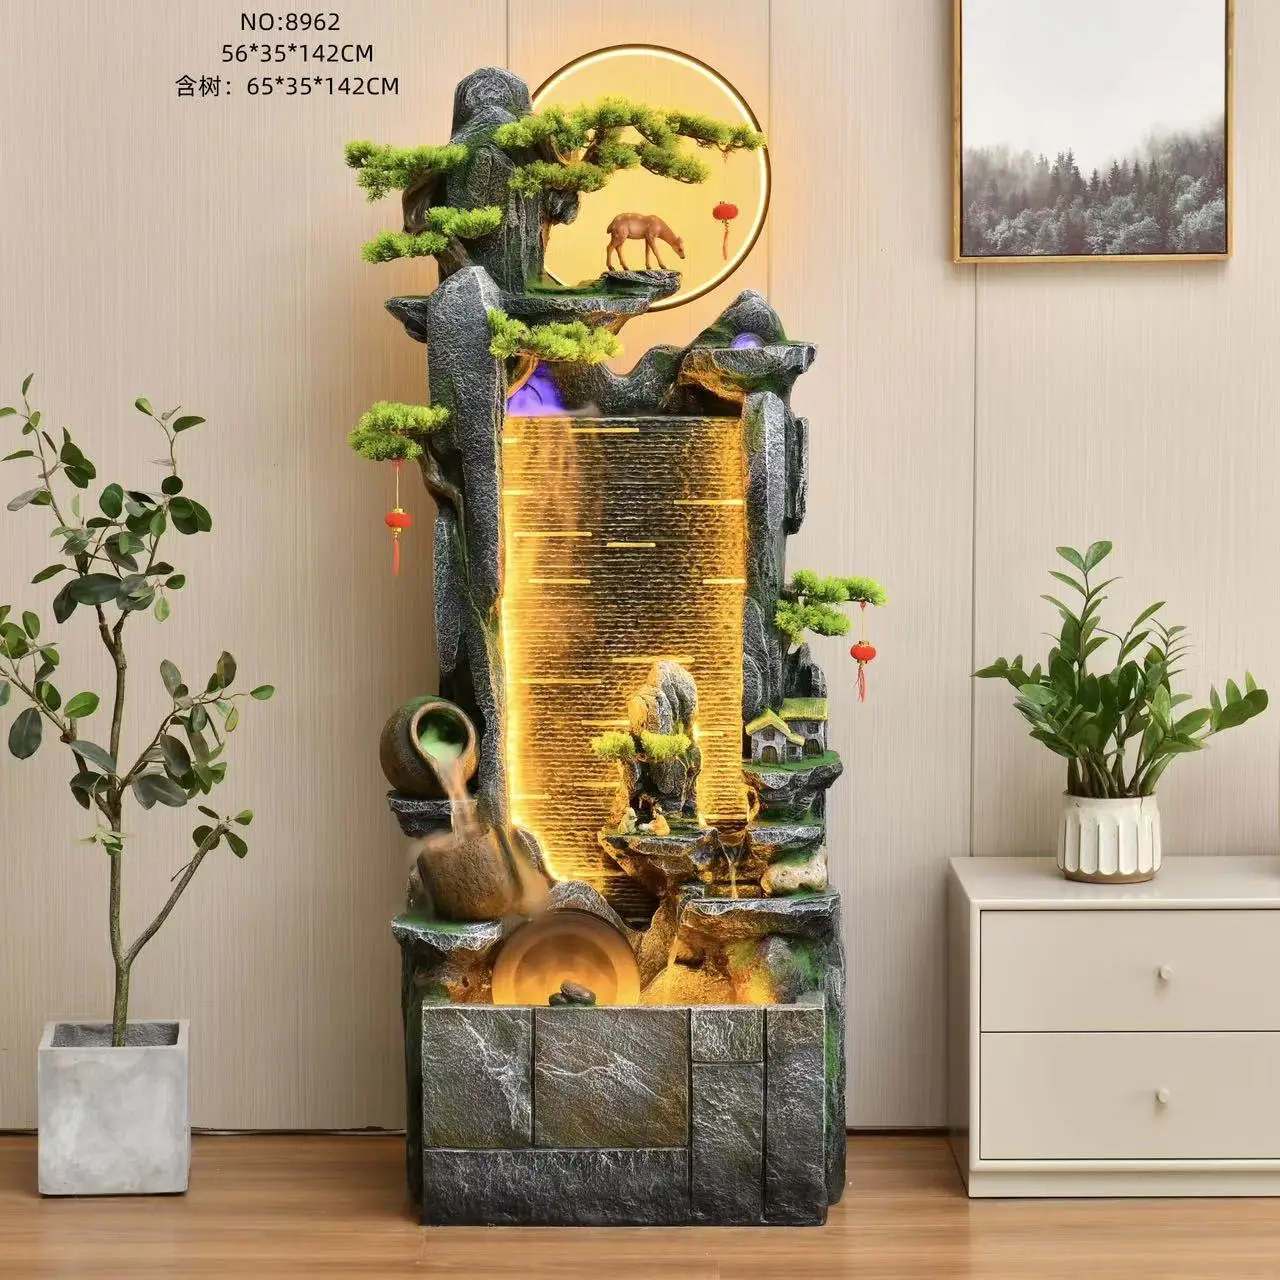 Outdoor Decoration Simulated Stone Rockery Fish Pond Automatic Plug-in Circulation Fiberglass High Quality Water Fountain